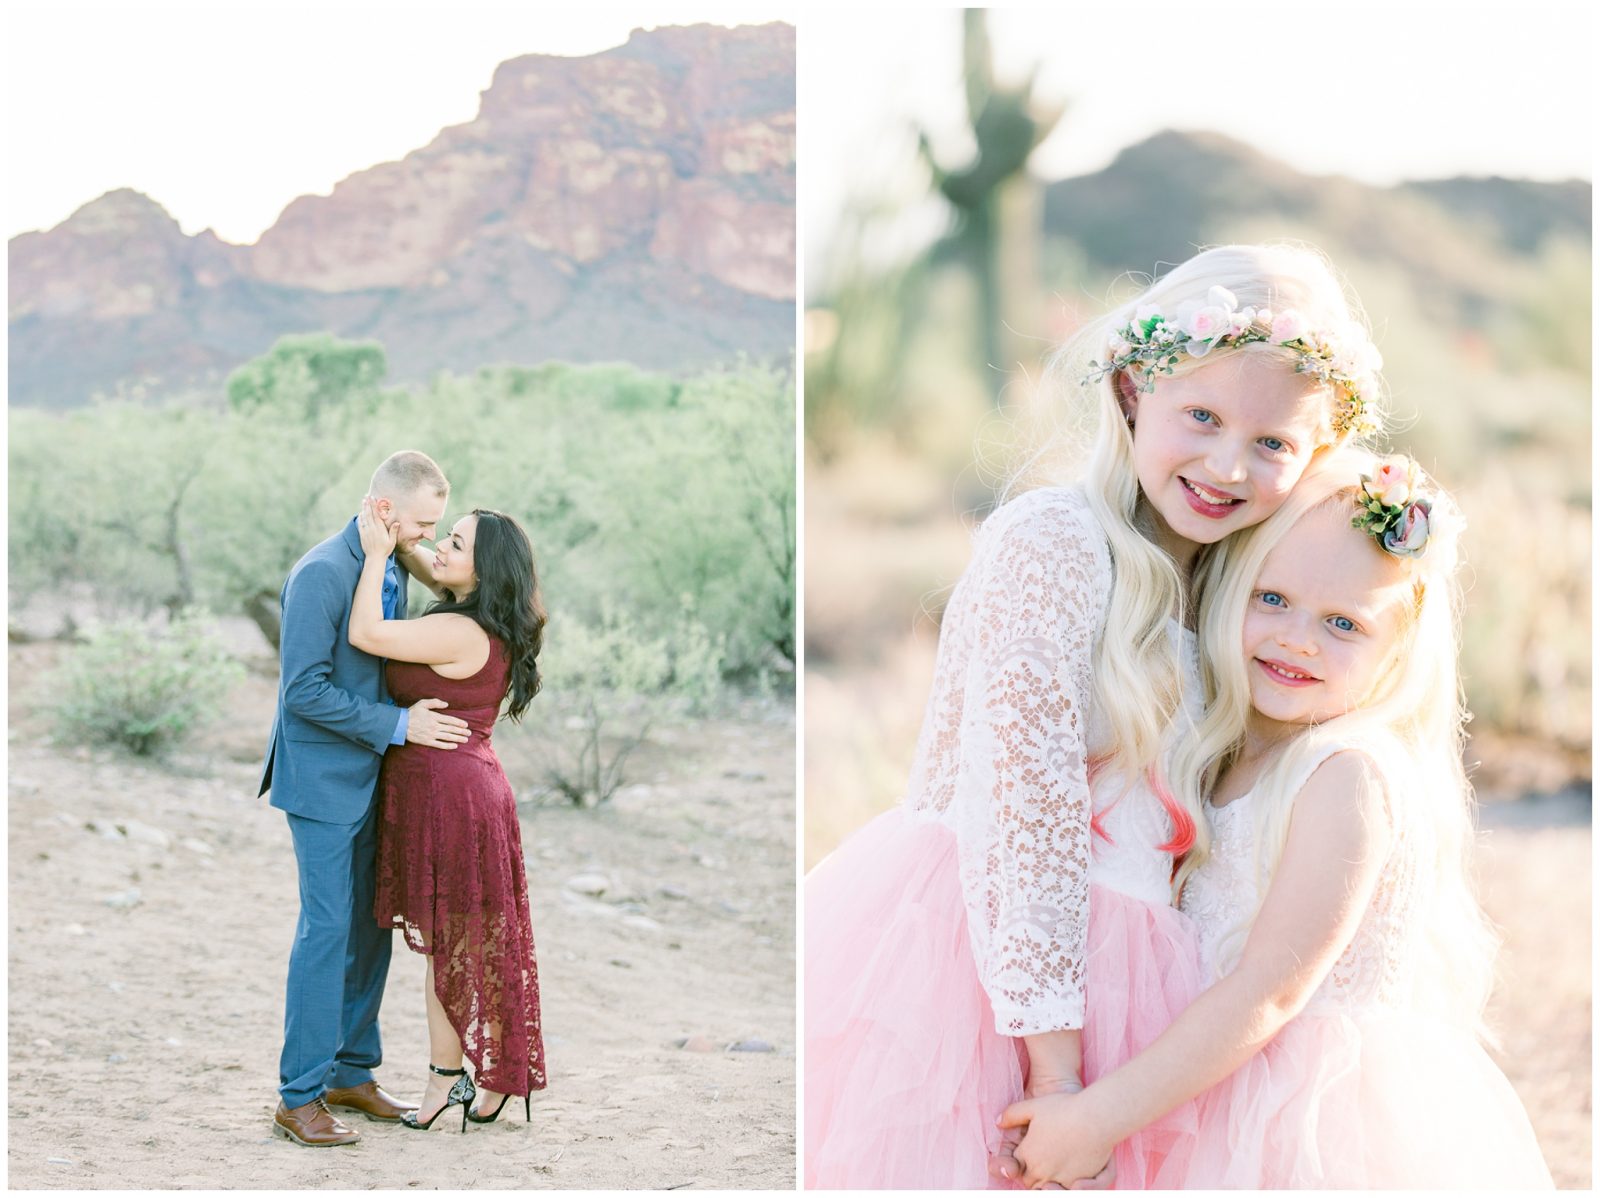 Fall Family Photography for Christmas Cards by Aly Kirk Photo in the east valley of Mesa, Arizona